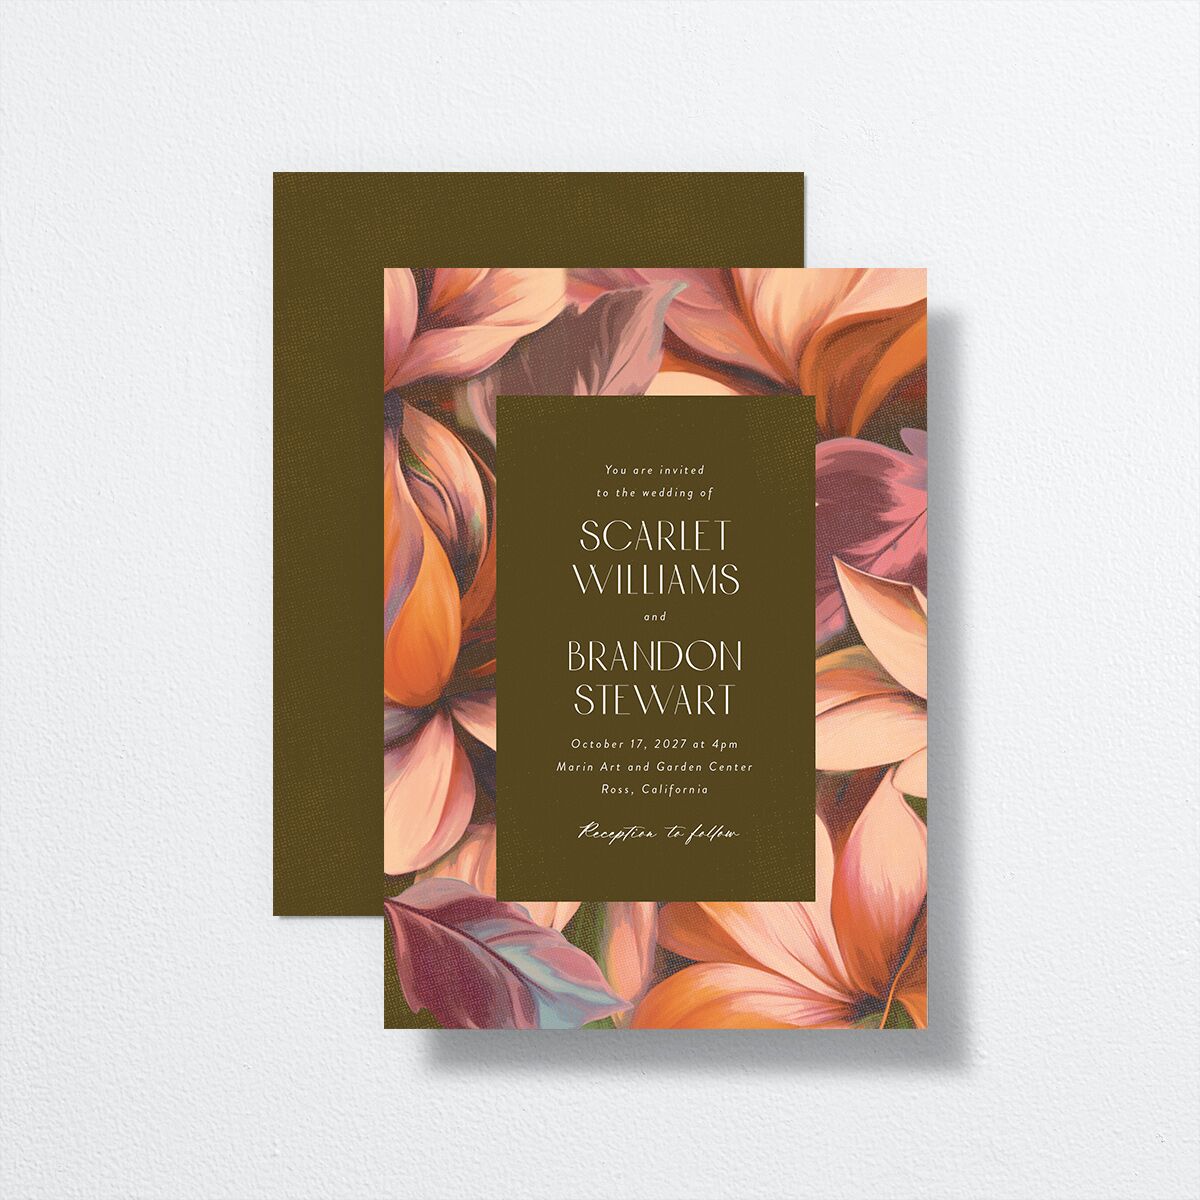 Falling In Love Wedding Invitations front-and-back in multi-color